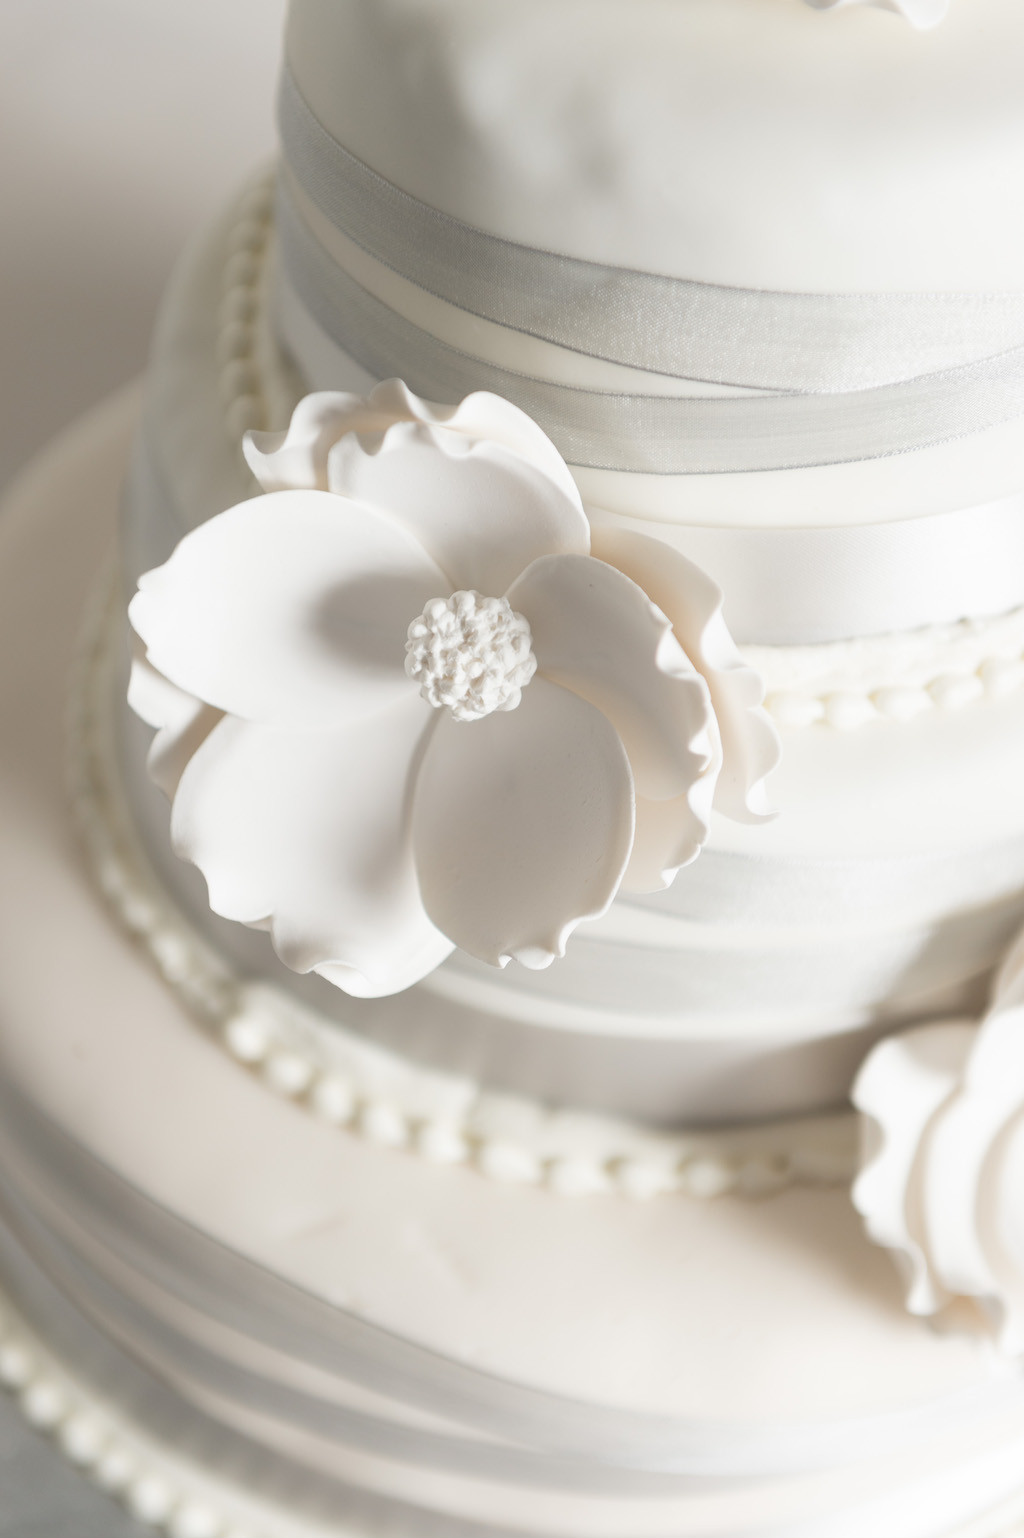 Three Tier White Wedding Cake with White Fondant Flowers, Silver Ribbon, on Silver Cake Stand